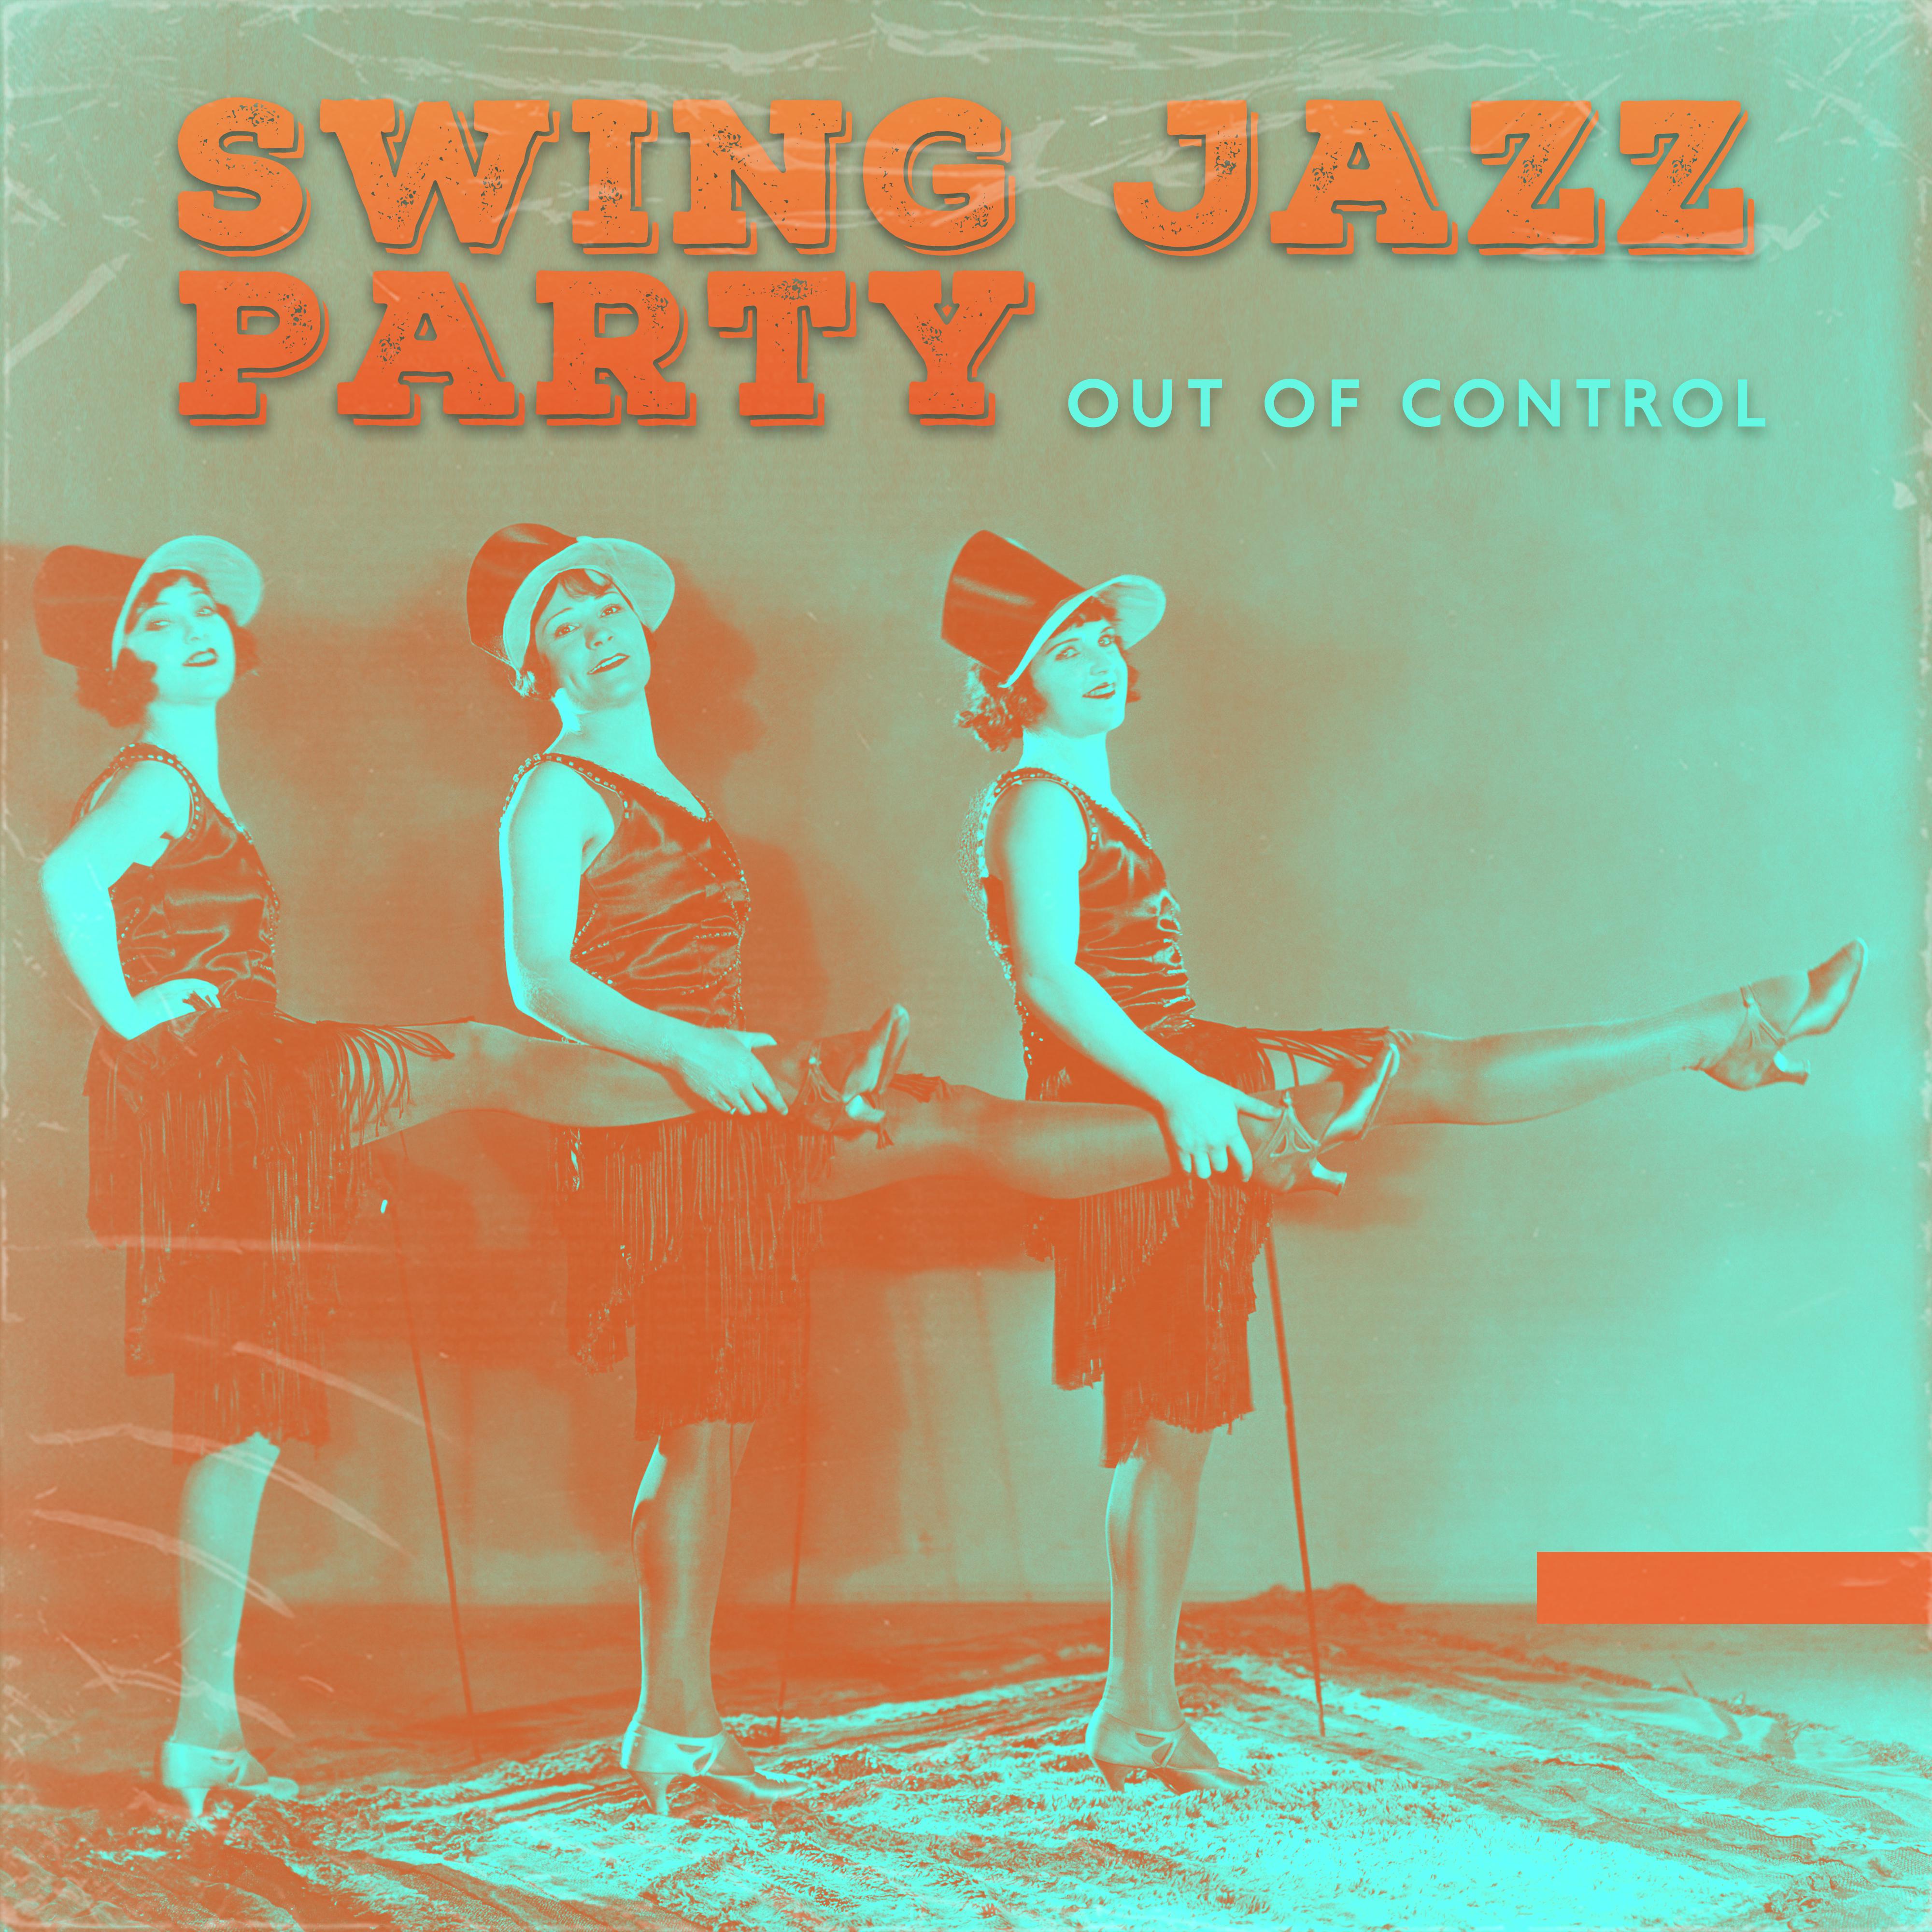 Swing Jazz Party Out of Control – 2019 Instrumental Smooth Jazz Happy Music Collection for Vintage Styled Dance Party, Oldschool Songs with Beautiful Sounds of Piano, Contrabass, Sax, Trumpet & More